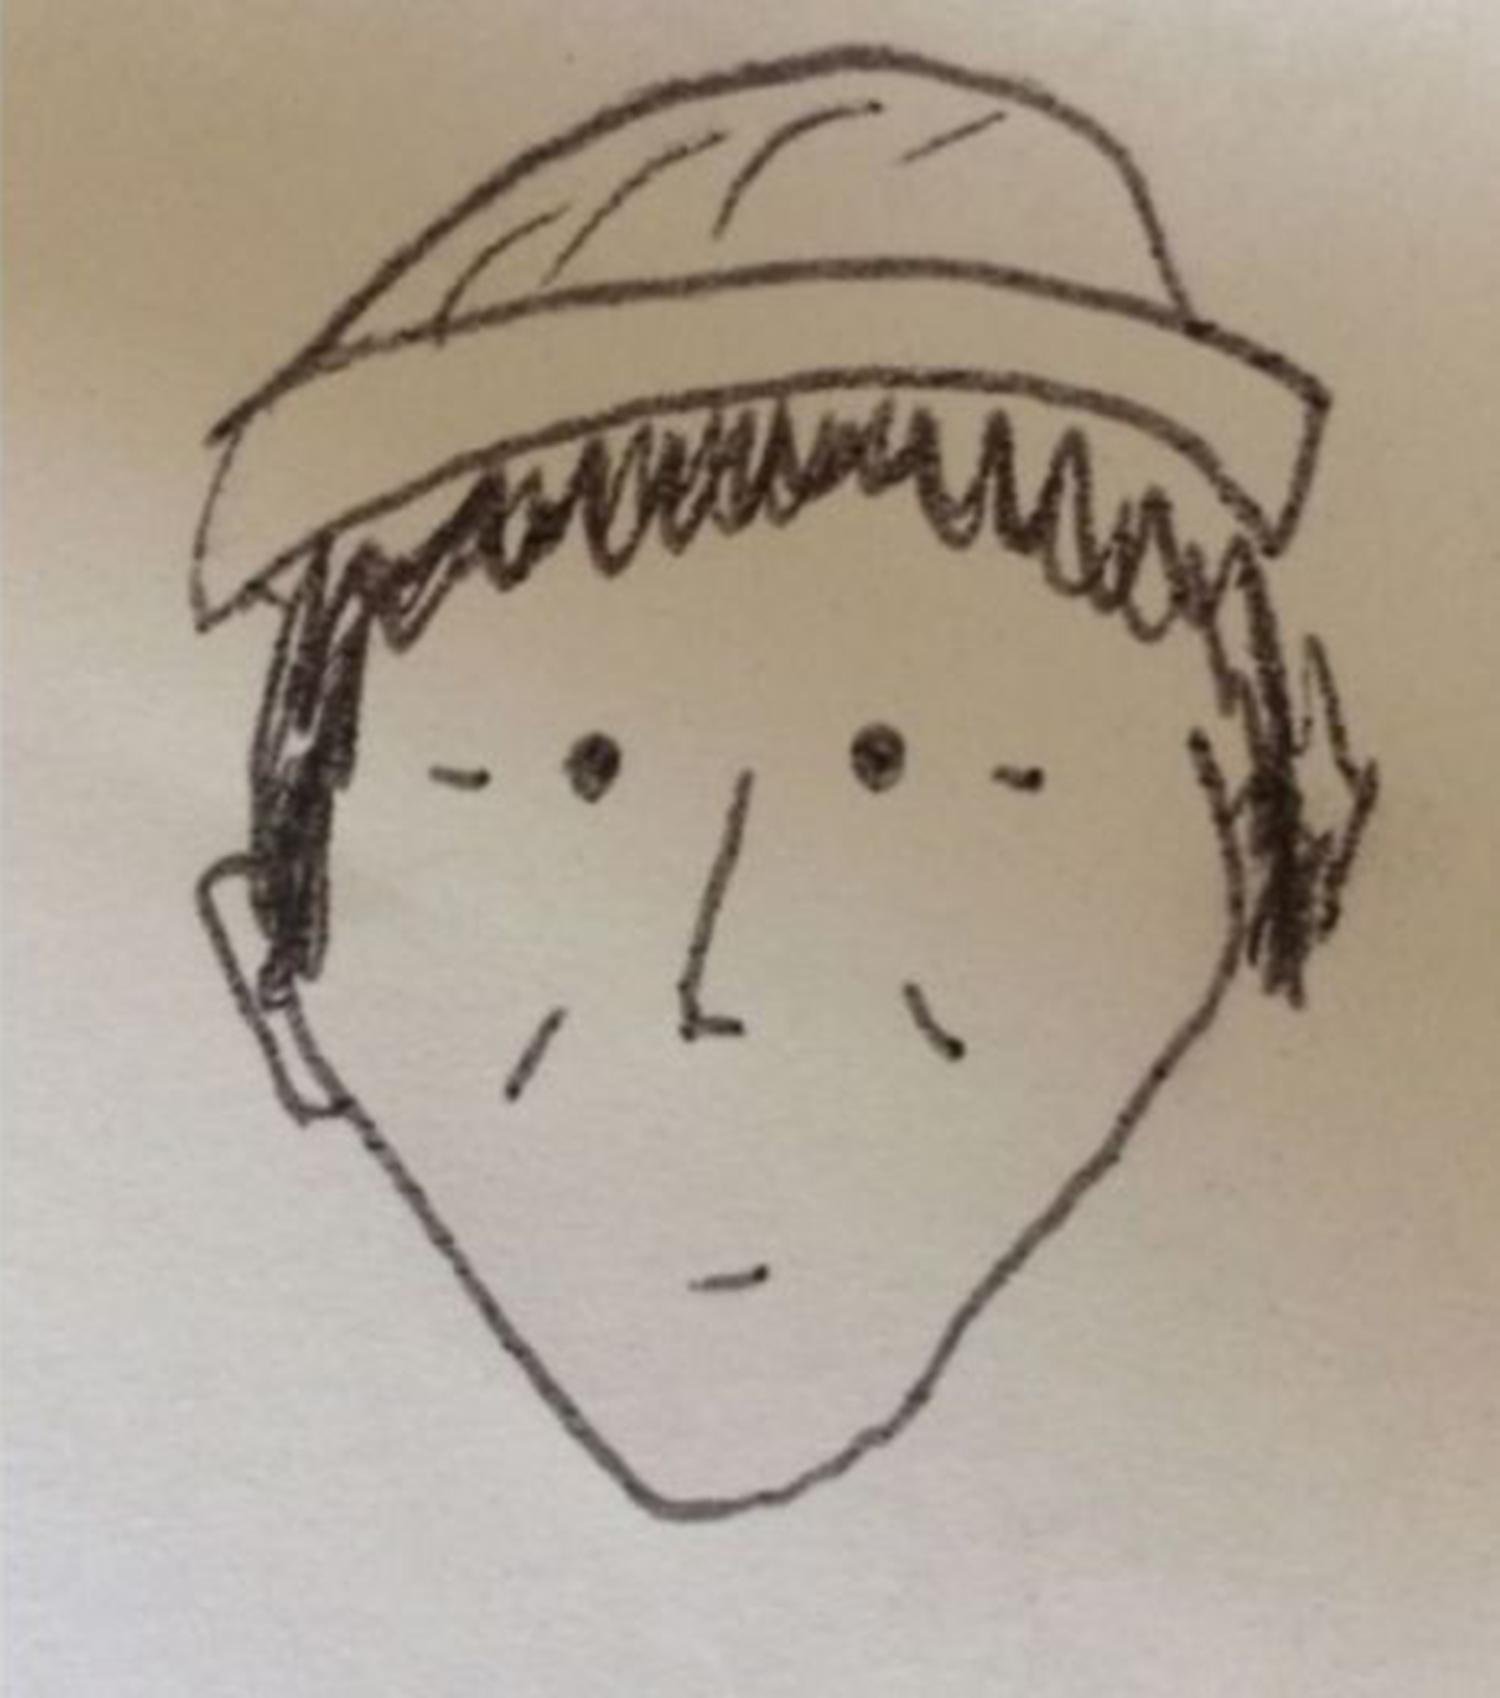  This childlike sketch actually helped police in Pennsylvania identify the suspected thief